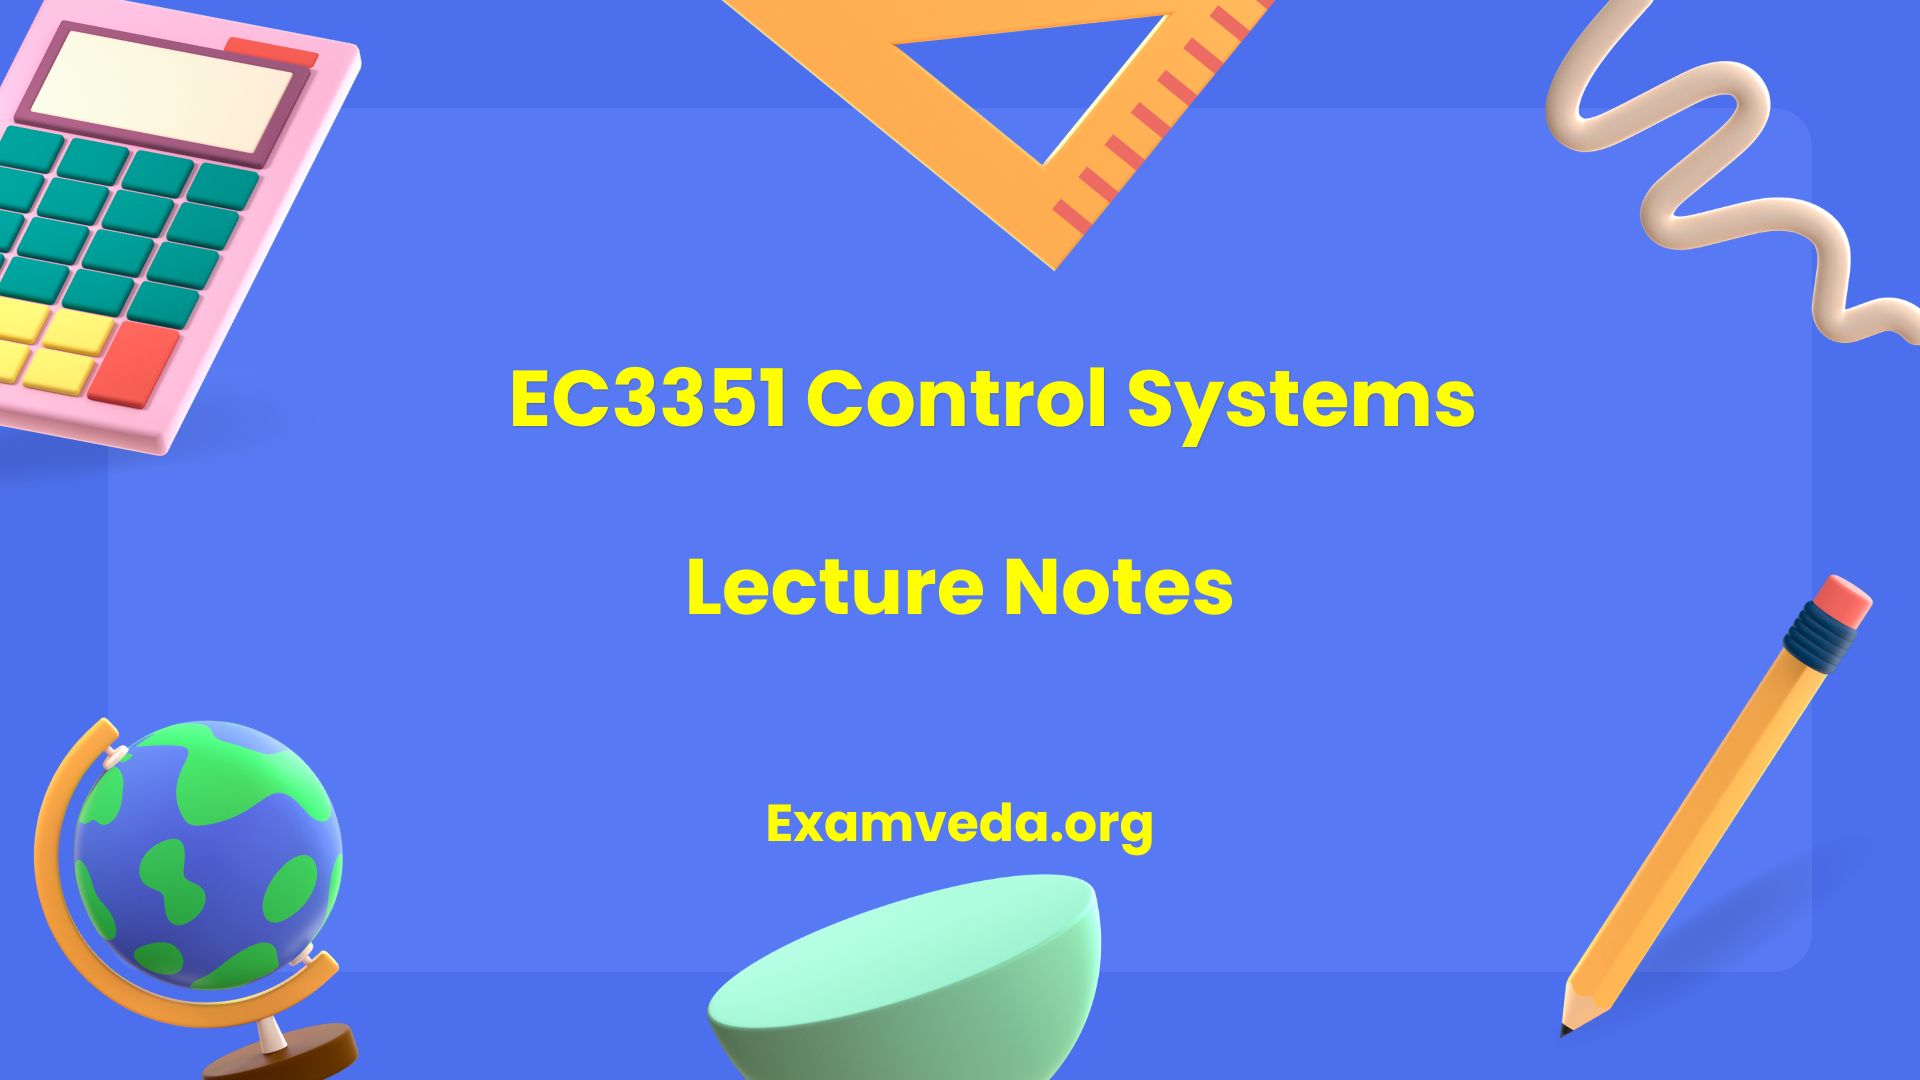 EC3351 Control Systems Lecture Notes